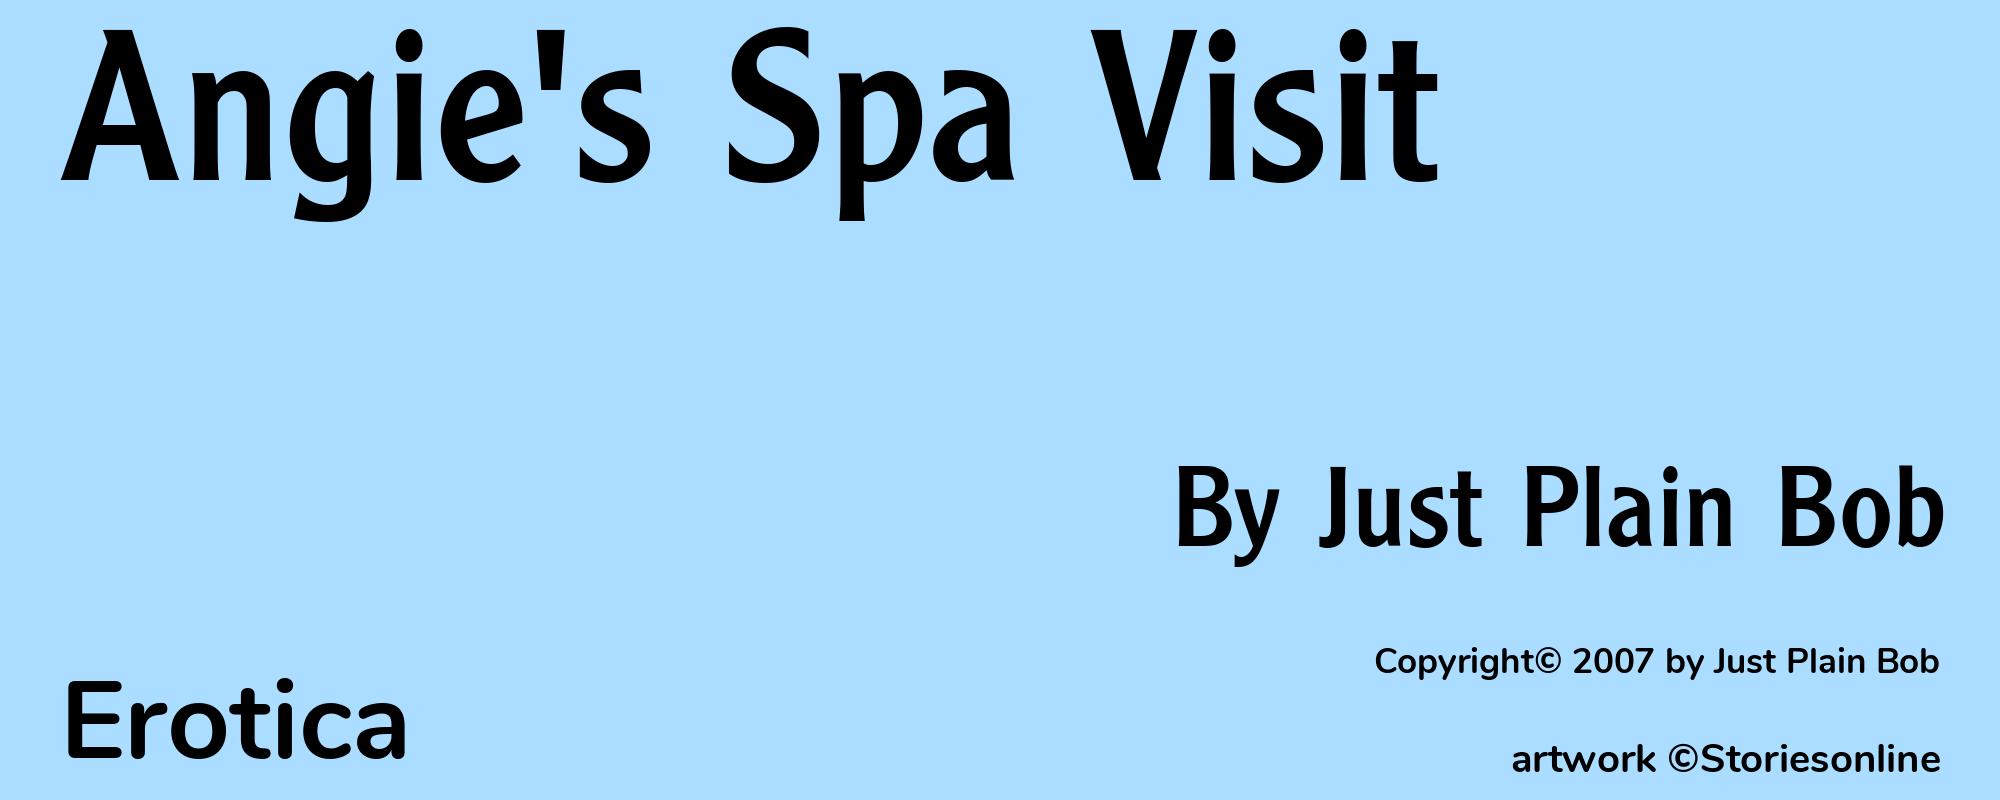 Angie's Spa Visit - Cover